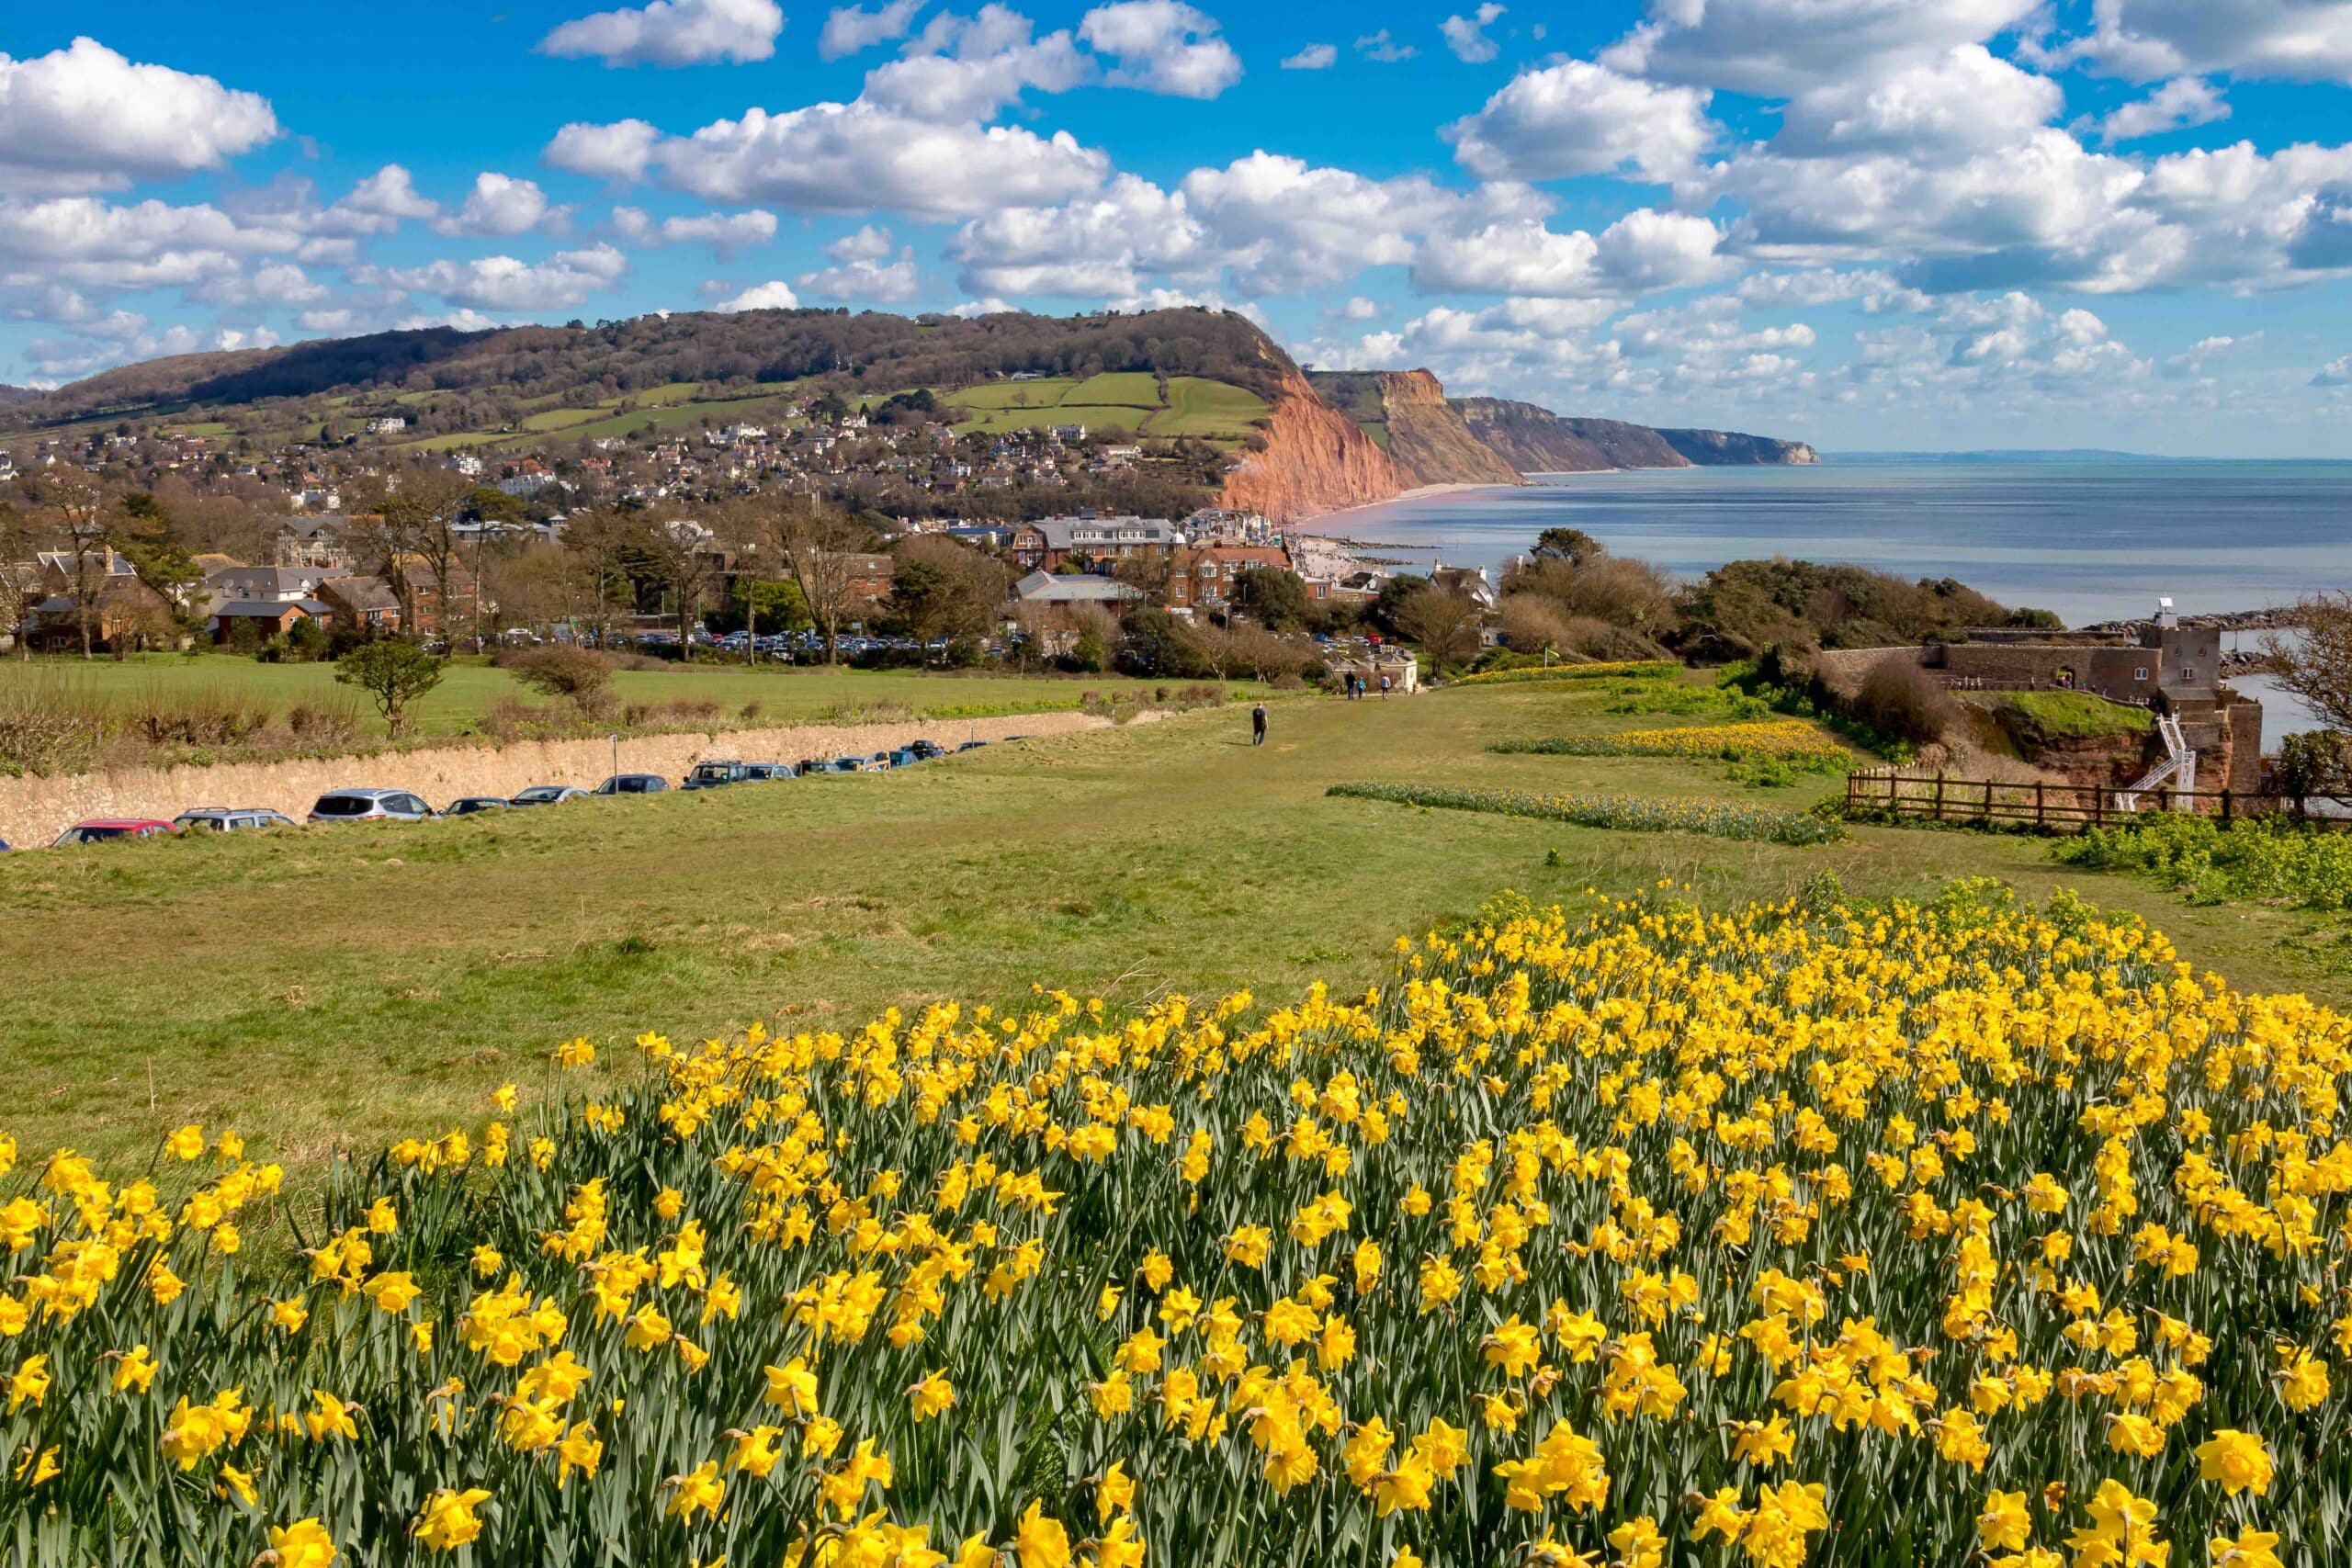 Beautiful springtime view of this popular seaside town showing daffodils in the foreground and the red cliffs of the area behind on a sunny clear day.